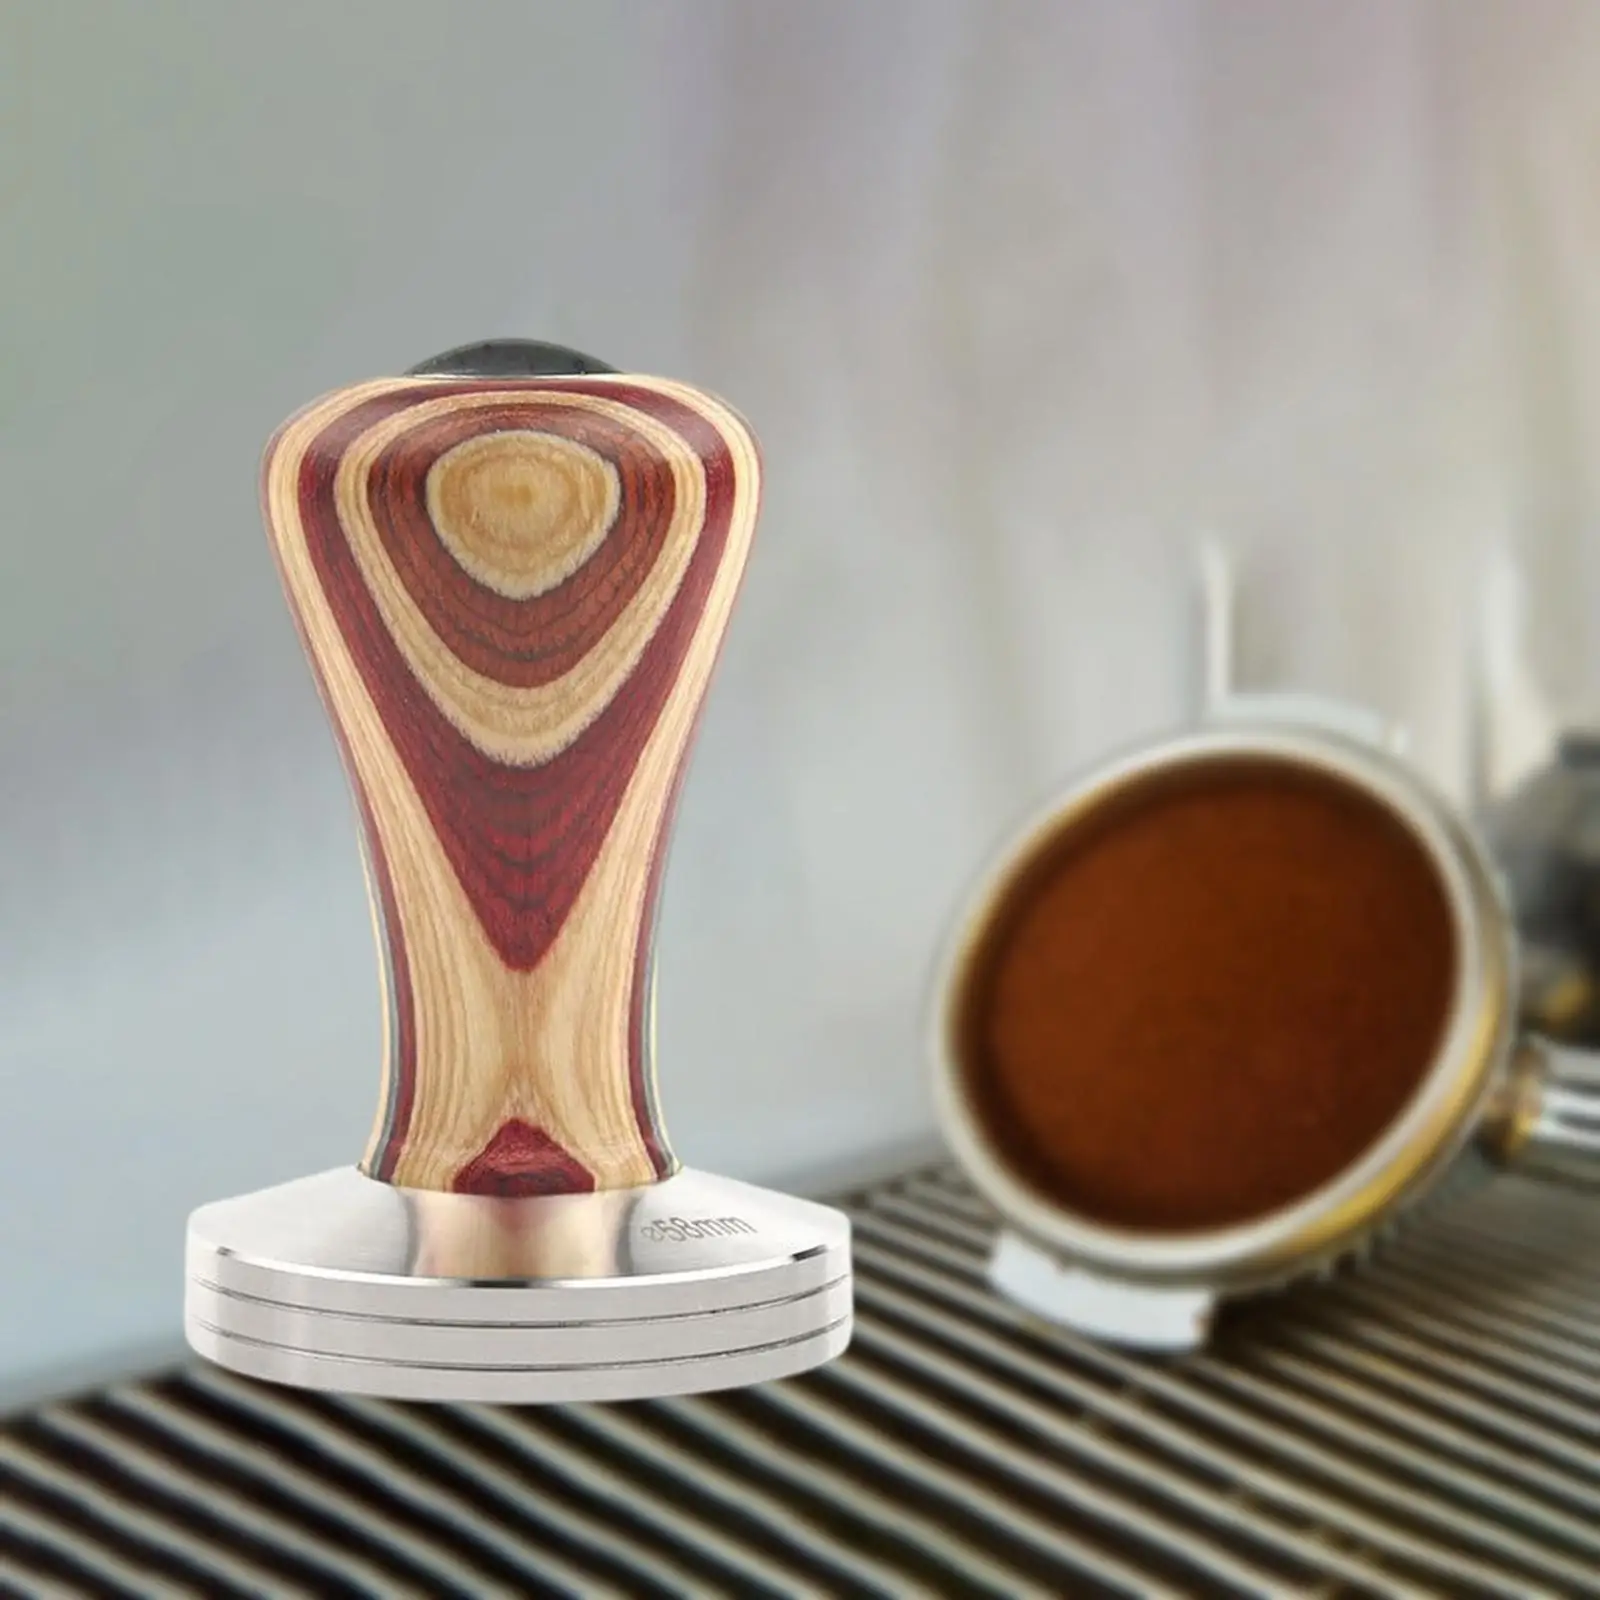 Espresso Coffee Tamper Professional Colorful Wood Handle Coffee Bean Pressing Tool Kitchen Accessories Reusable for Barista Gift